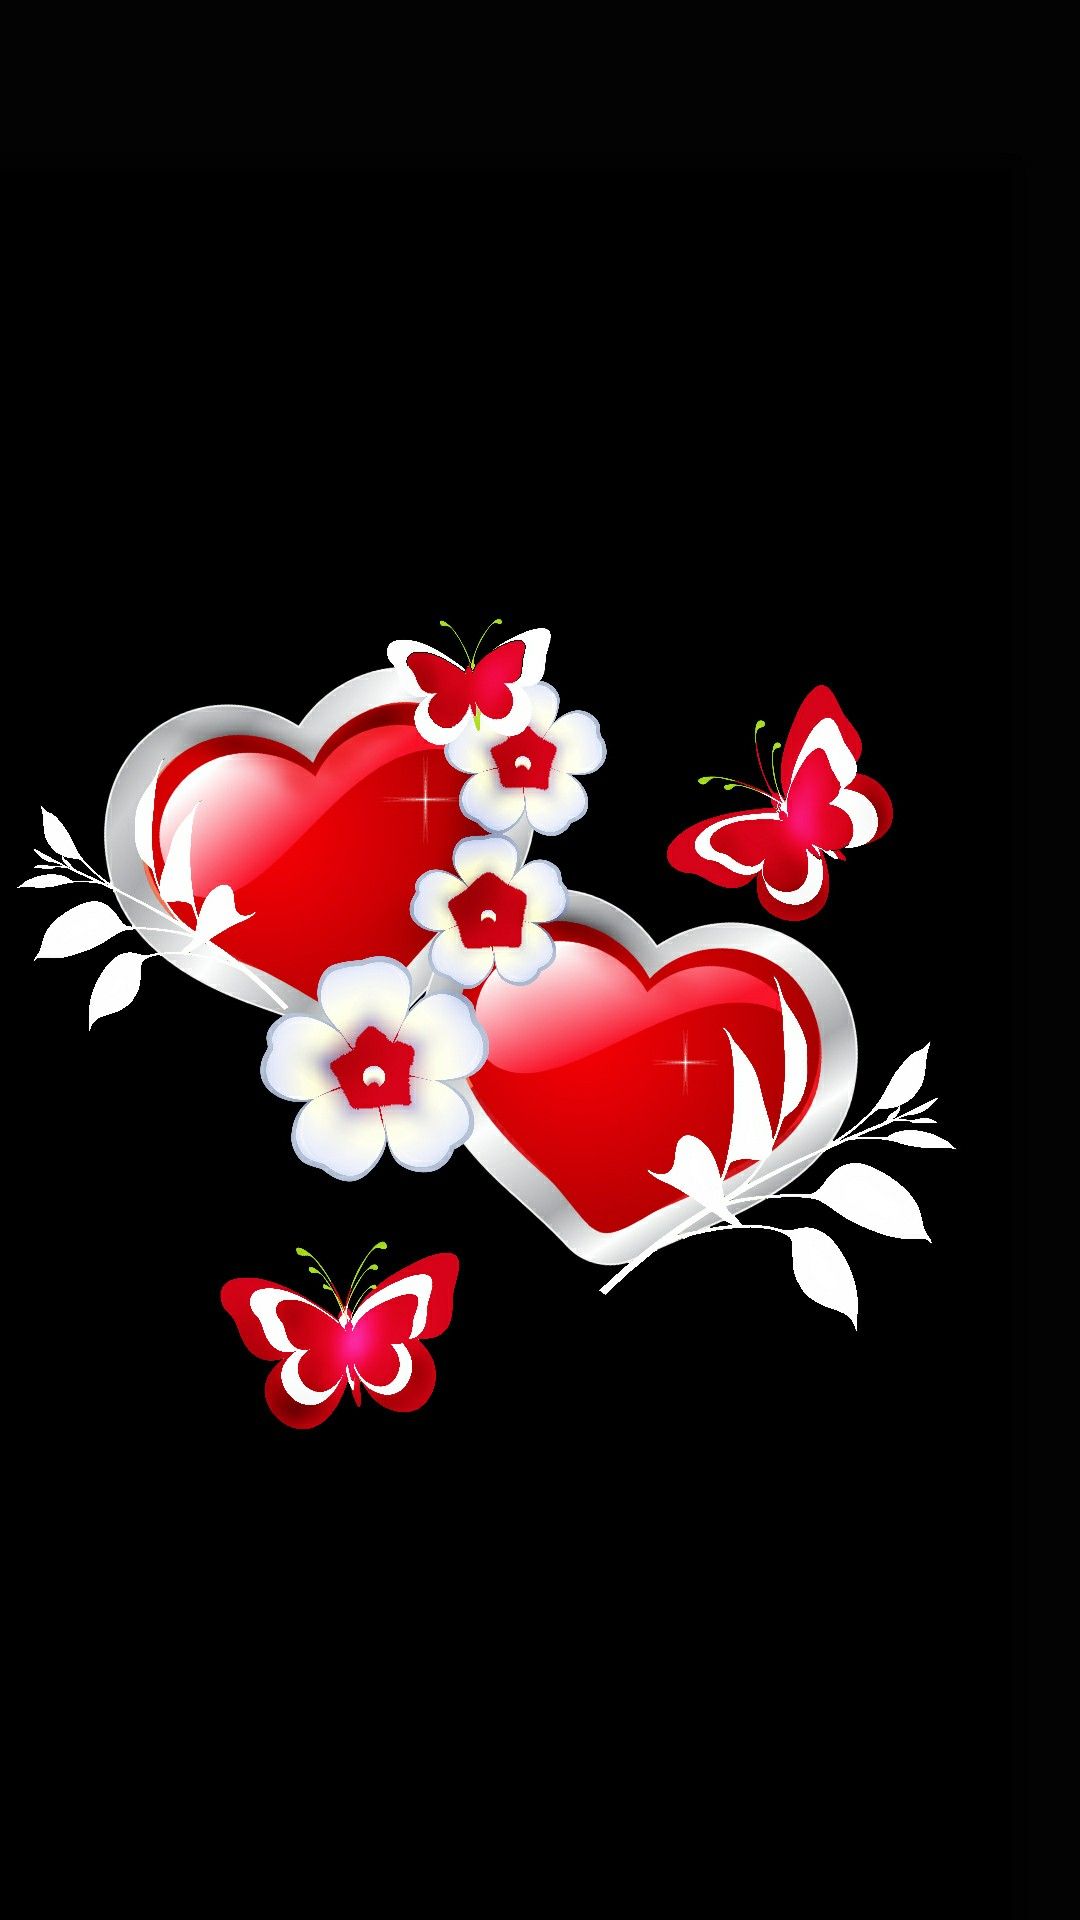 Red & white hearts & butterflies. Heart wallpaper, Valentines